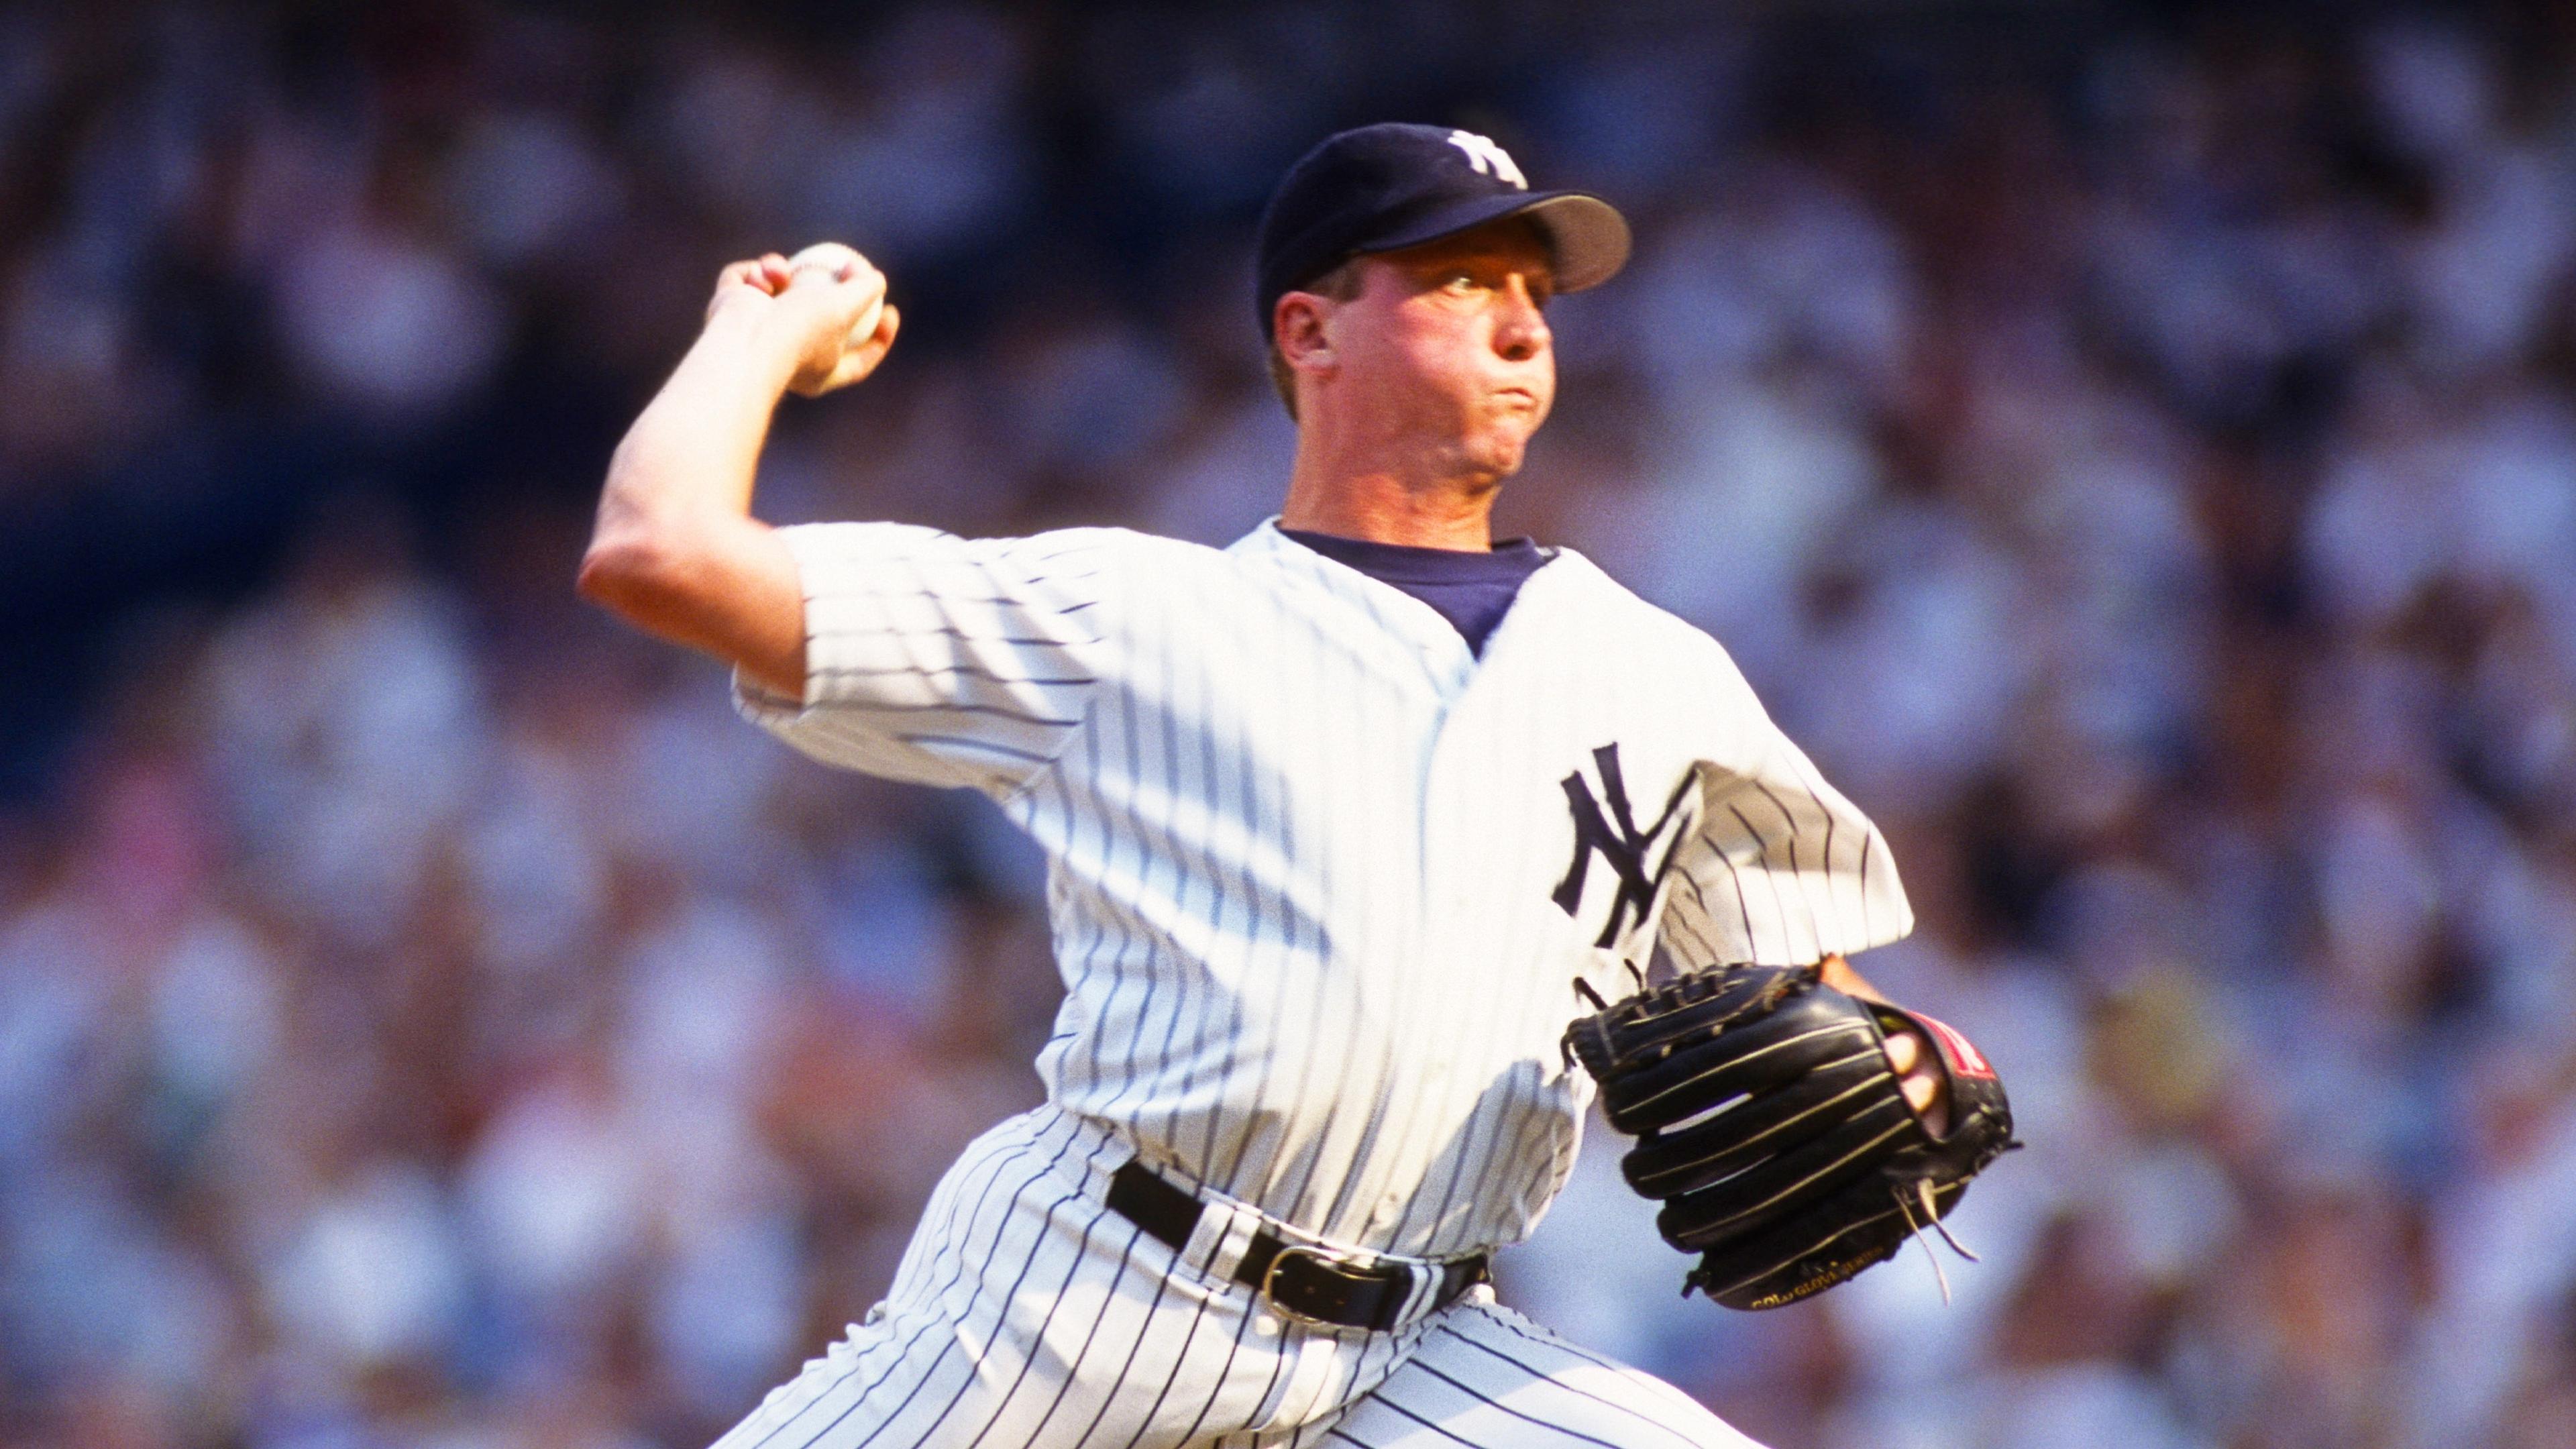 New York Yankees pitcher David Cone (36) in action against the Minnesota Twins at Yankee Stadium. / Lou Capozzola-USA TODAY Sports